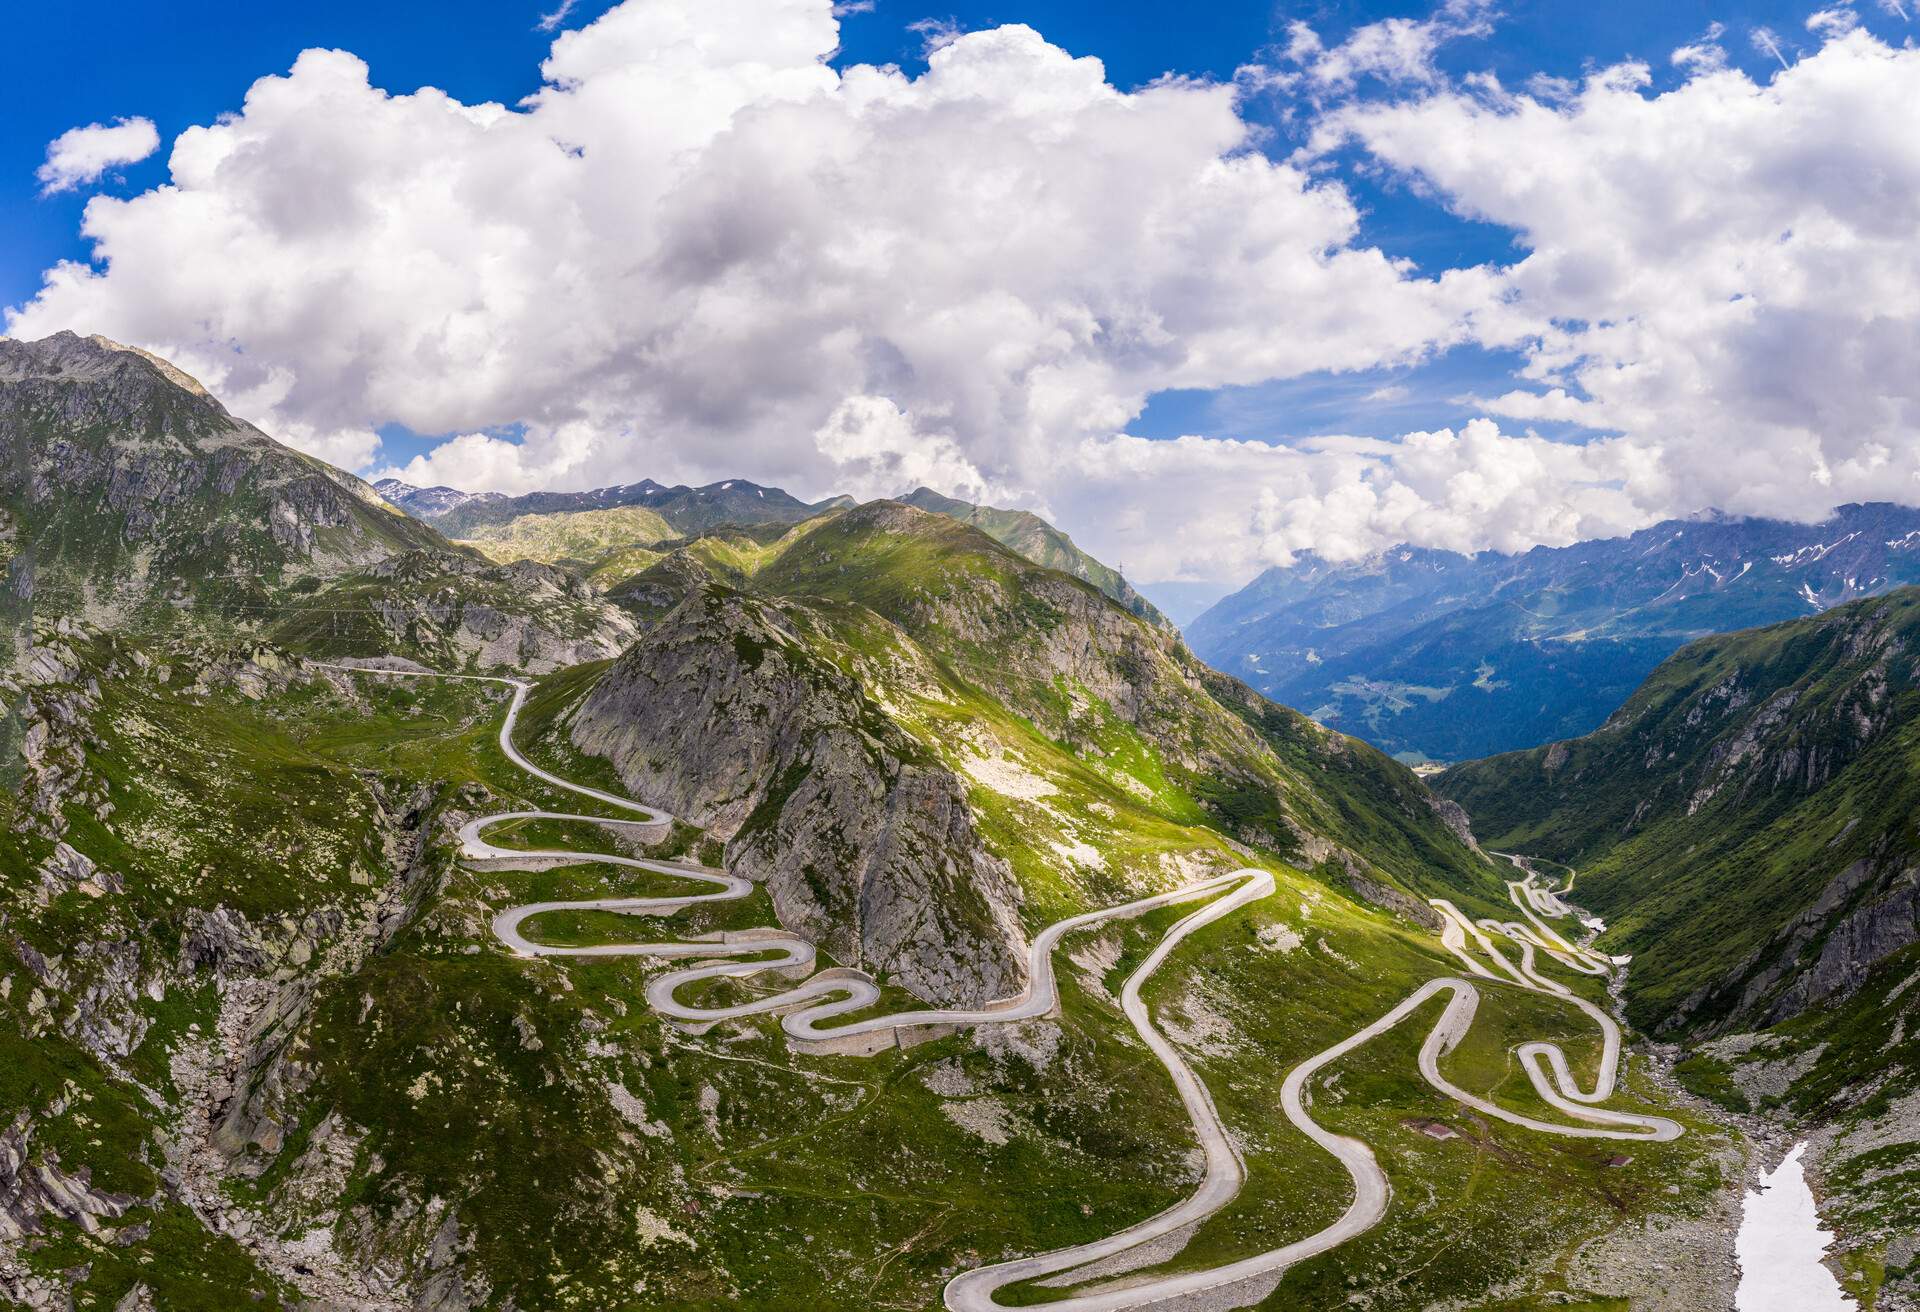 A view of the gotthard pass ancient road, the Tremola, that links the canton of Ticino and Uri through the alps in Switzerland